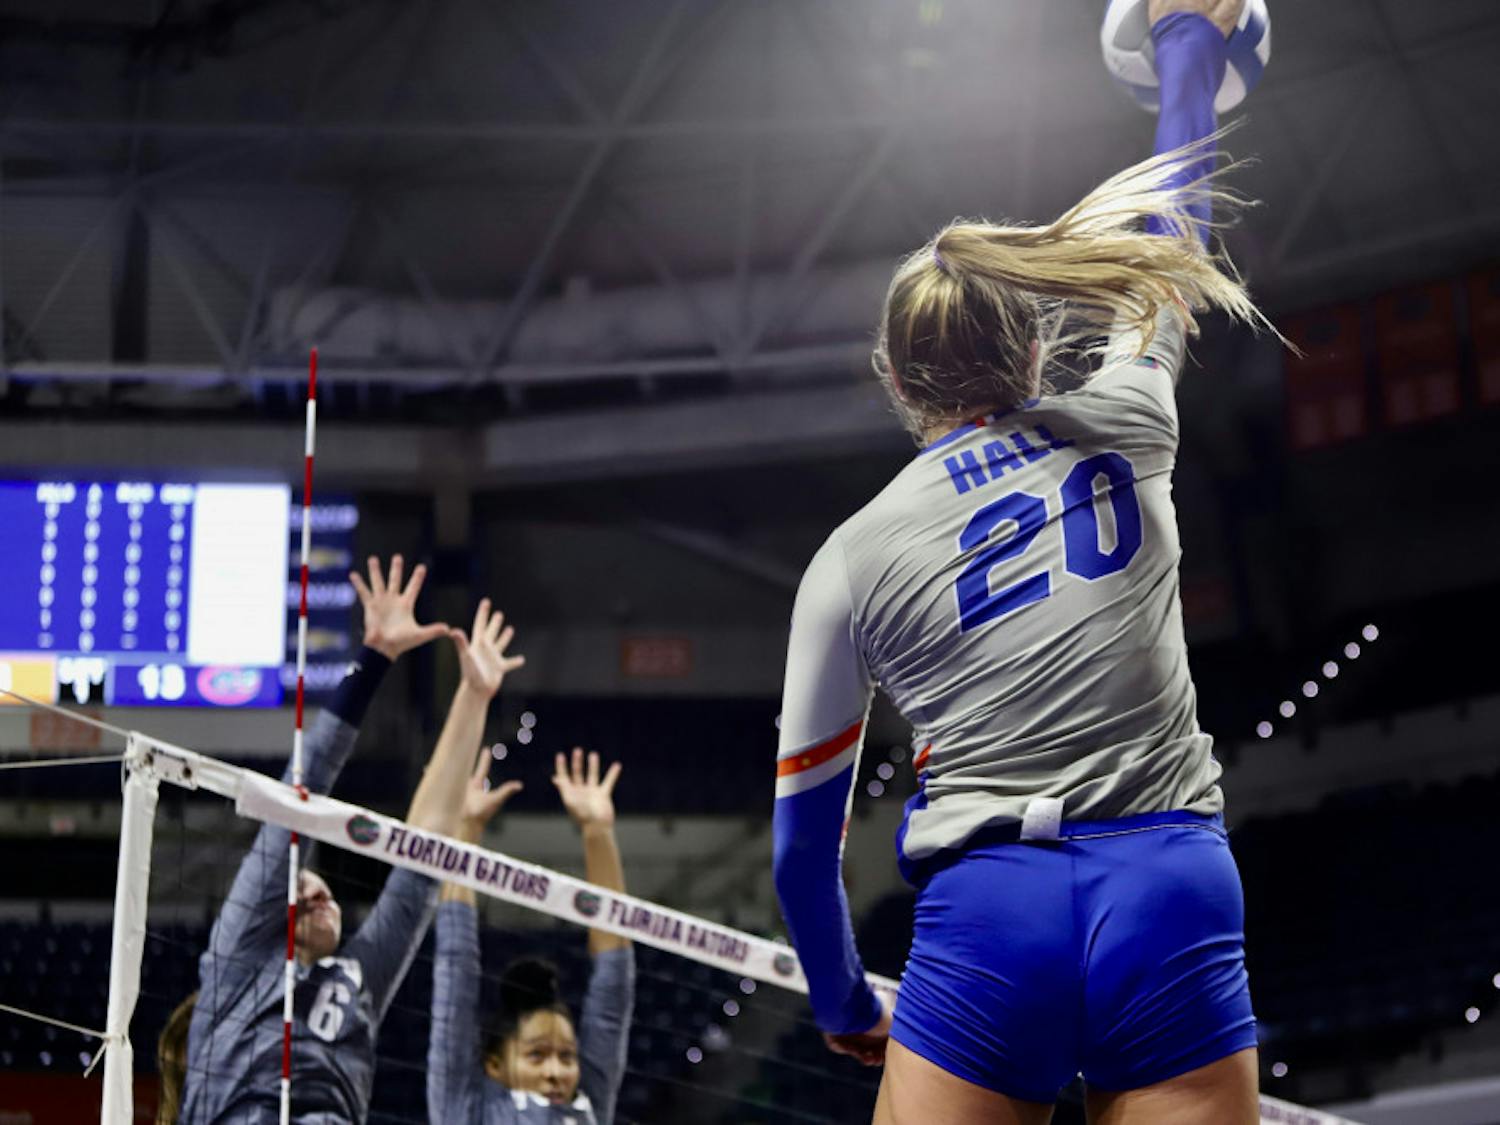 Sophomore outside hitter Thayer Hall was named the MVP of the Gators Invitational this weekend.